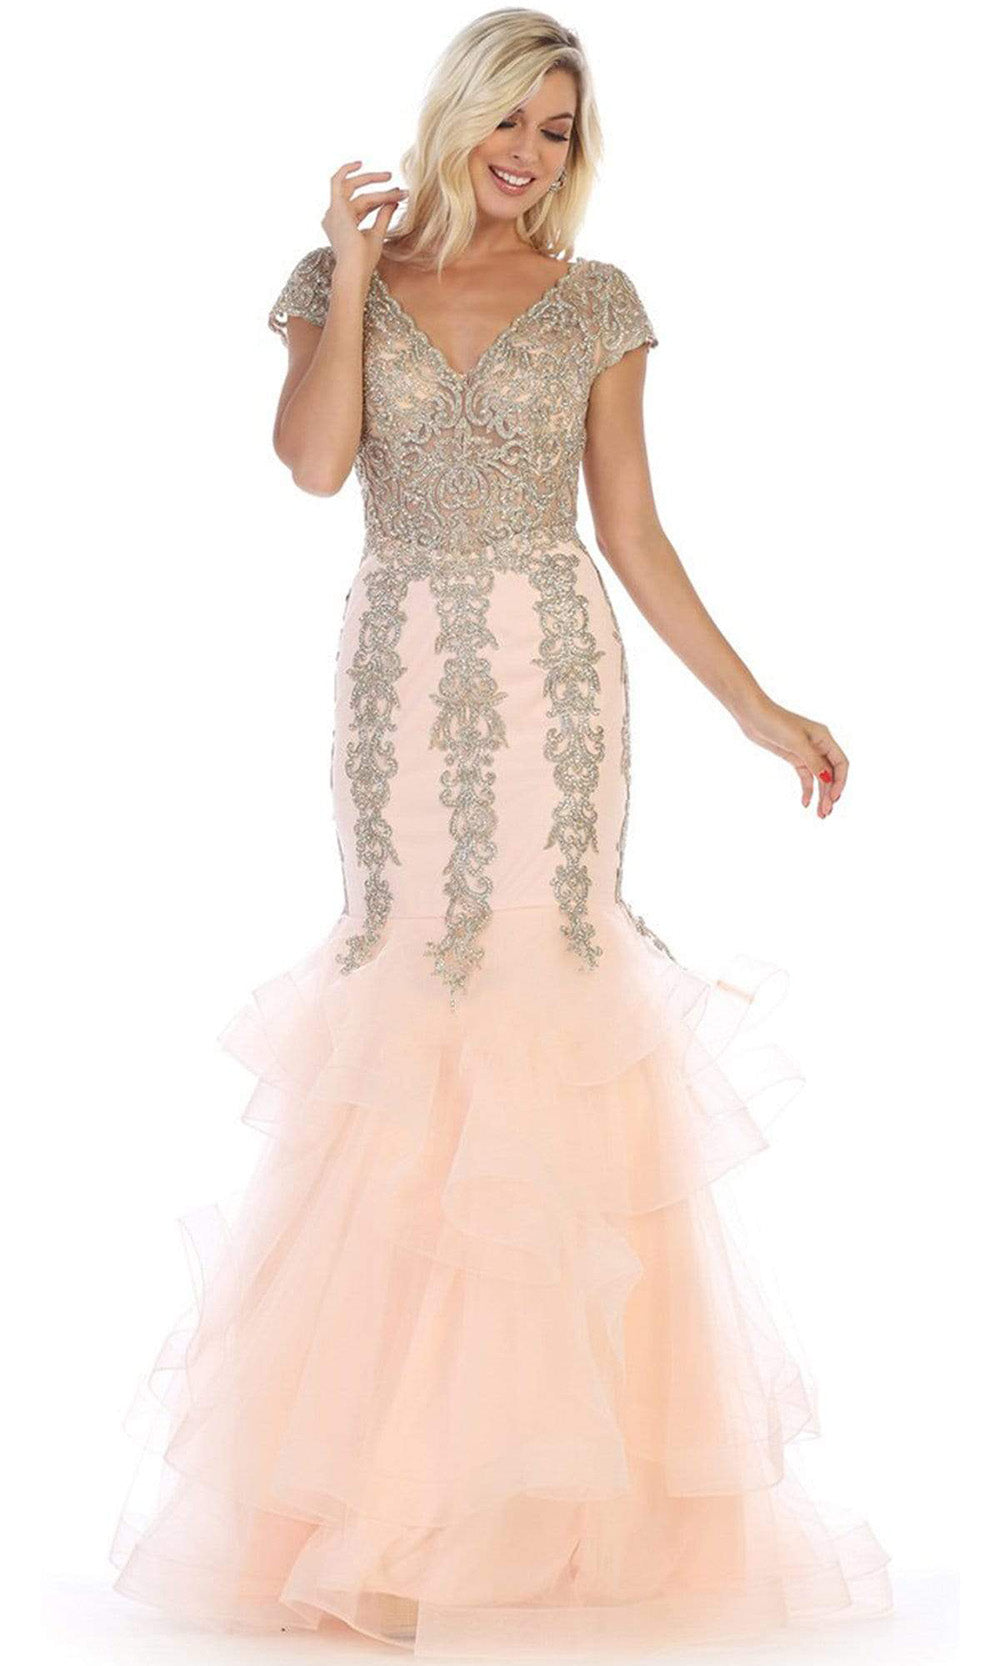 May Queen - RQ7690SC V Neck Scalloped Mermaid Gown In Pink and Gold